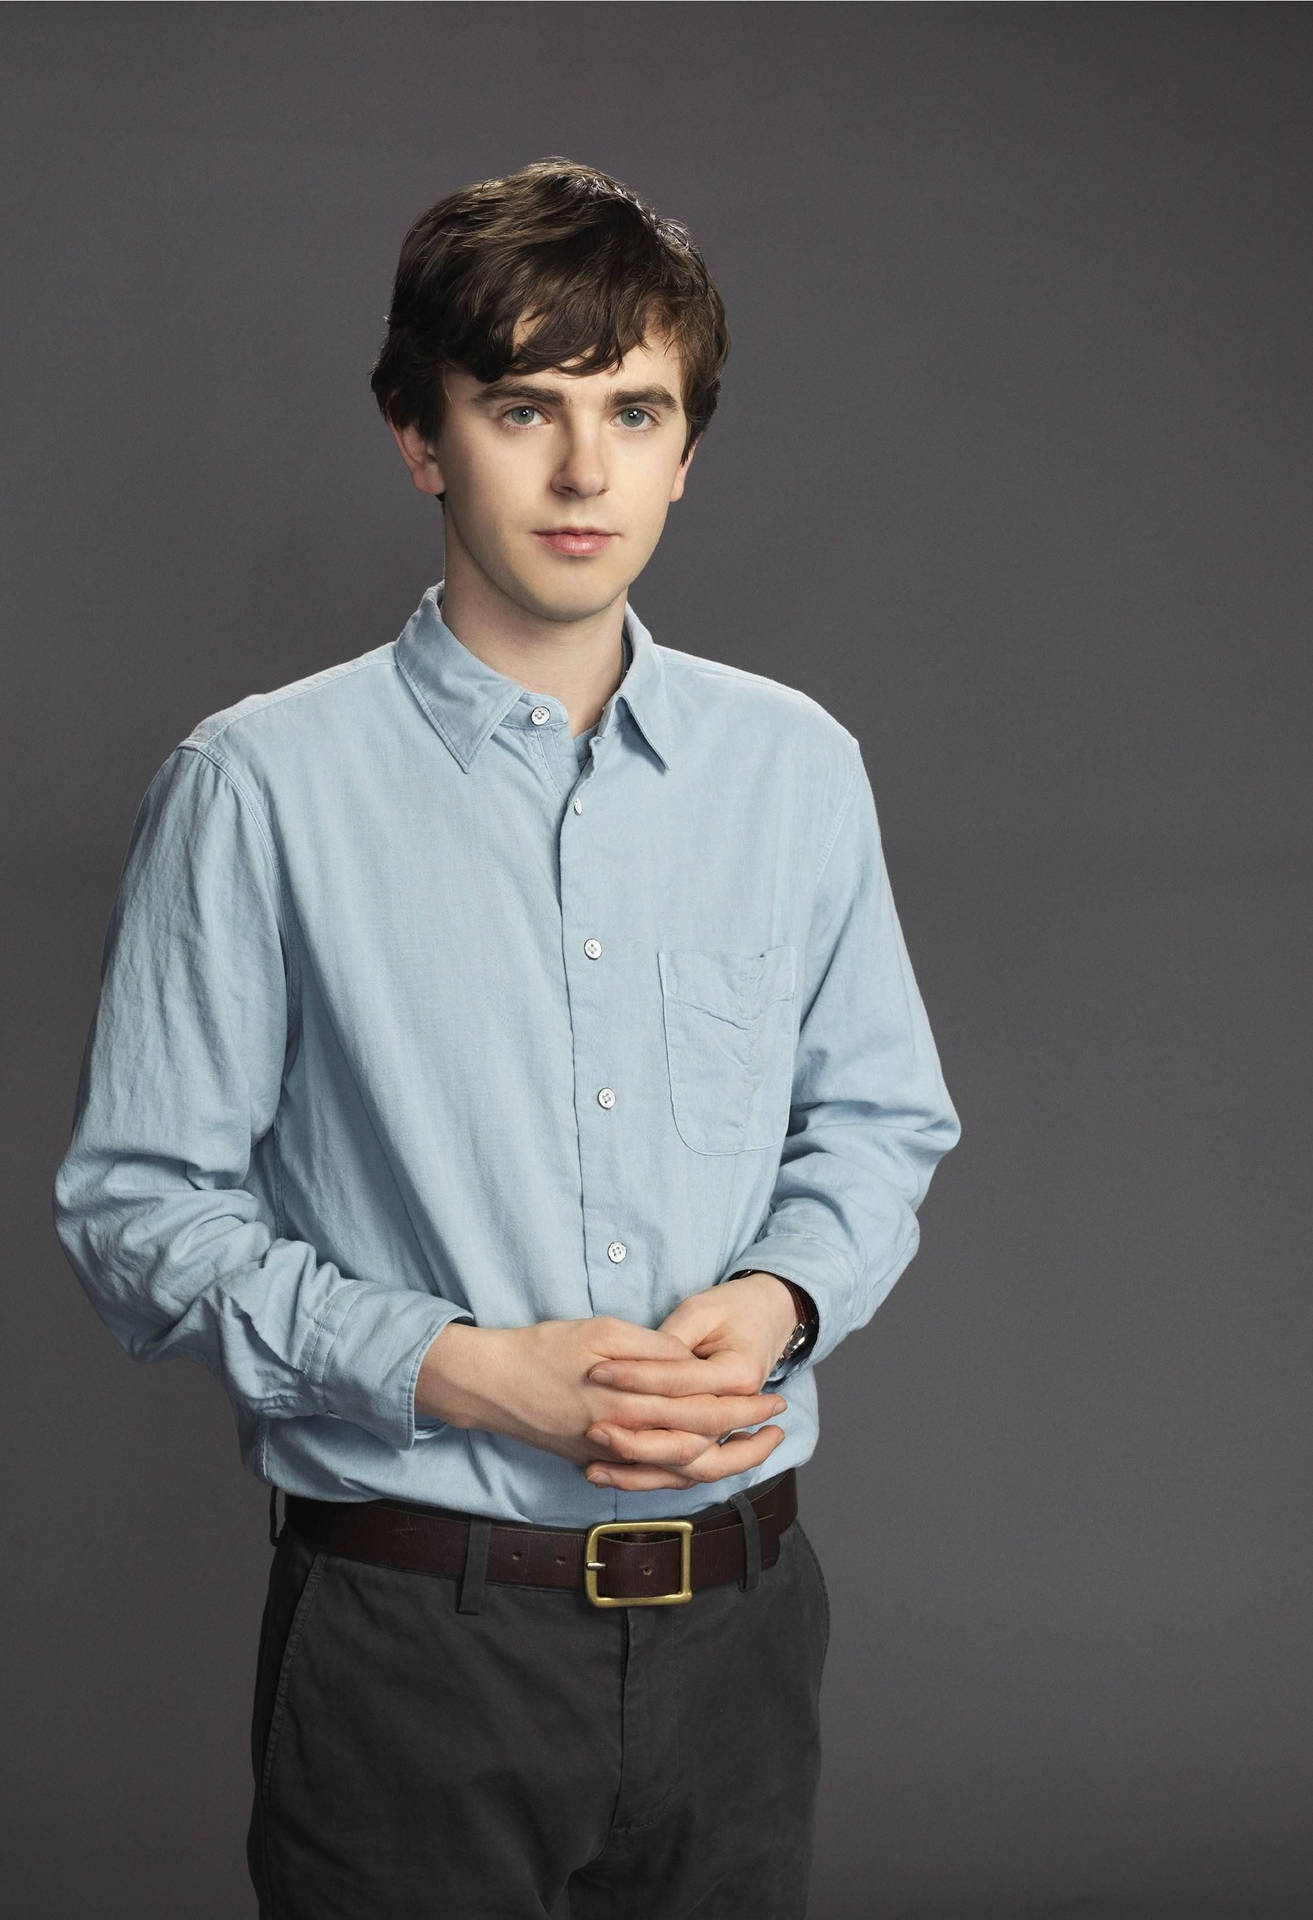 The Good Doctor Freddie Highmore Background